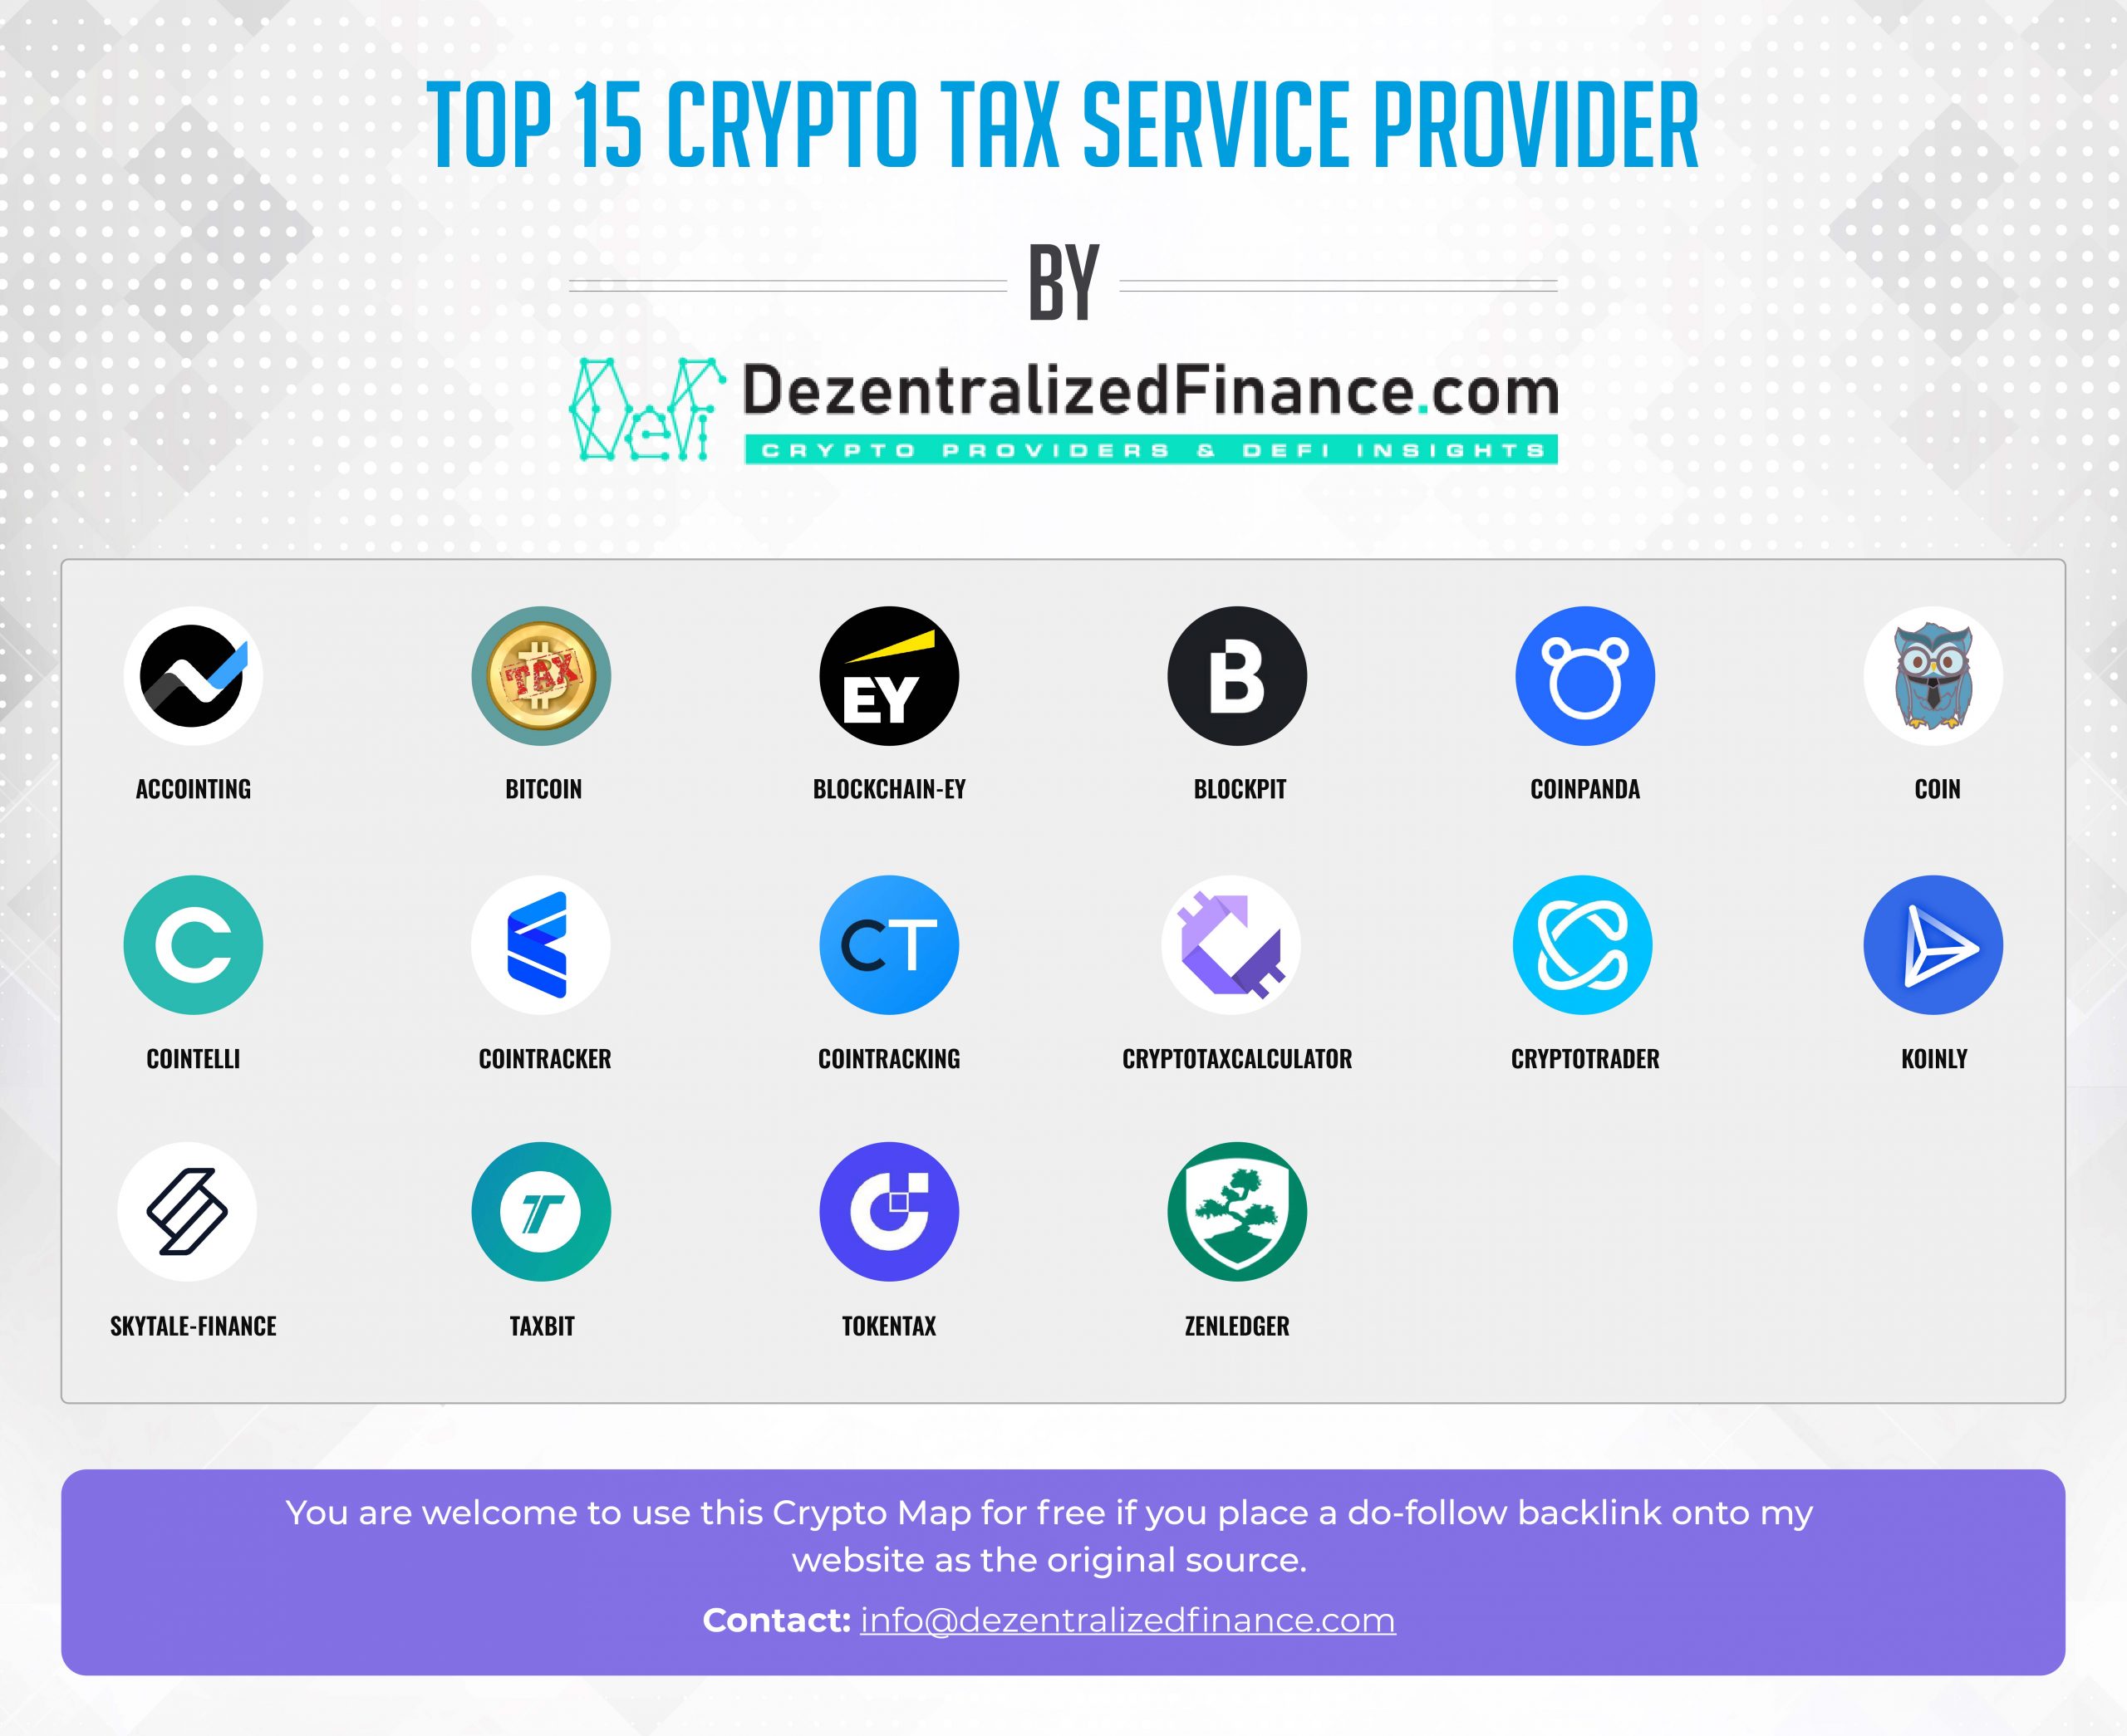 Top 15 Crypto Tax Service Provider scaled